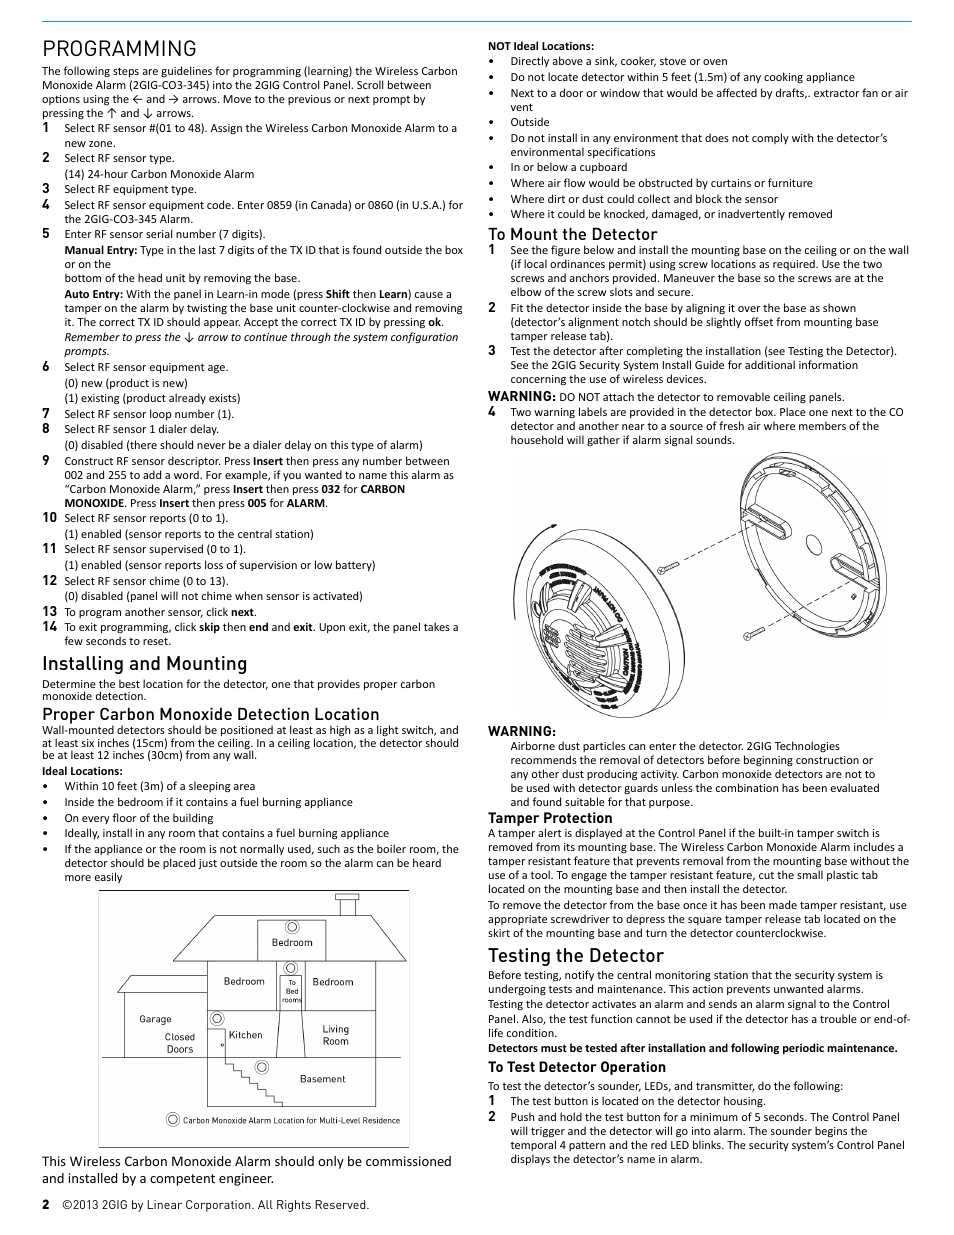 Programming, Installing and mounting, Testing the detector | Proper carbon monoxide detection location | 2GIG CO3-345 Carbon Monoxide Detector User Manual | Page 2 / 3